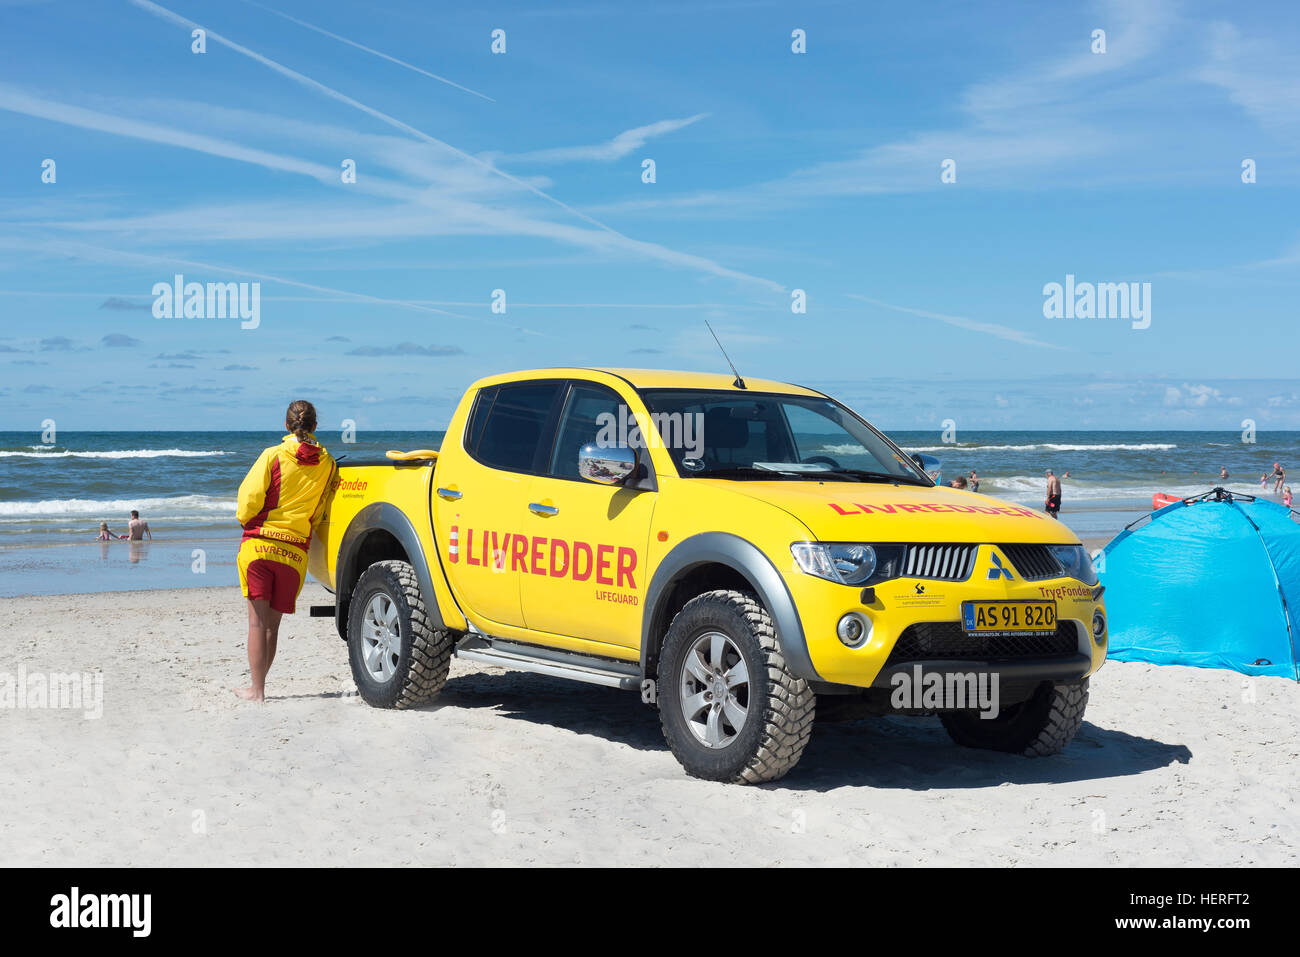 Yellow car with inscription Livredder on Henne Beach, water rescue service in use, Henne, Southern Denmark, The North Sea Stock Photo